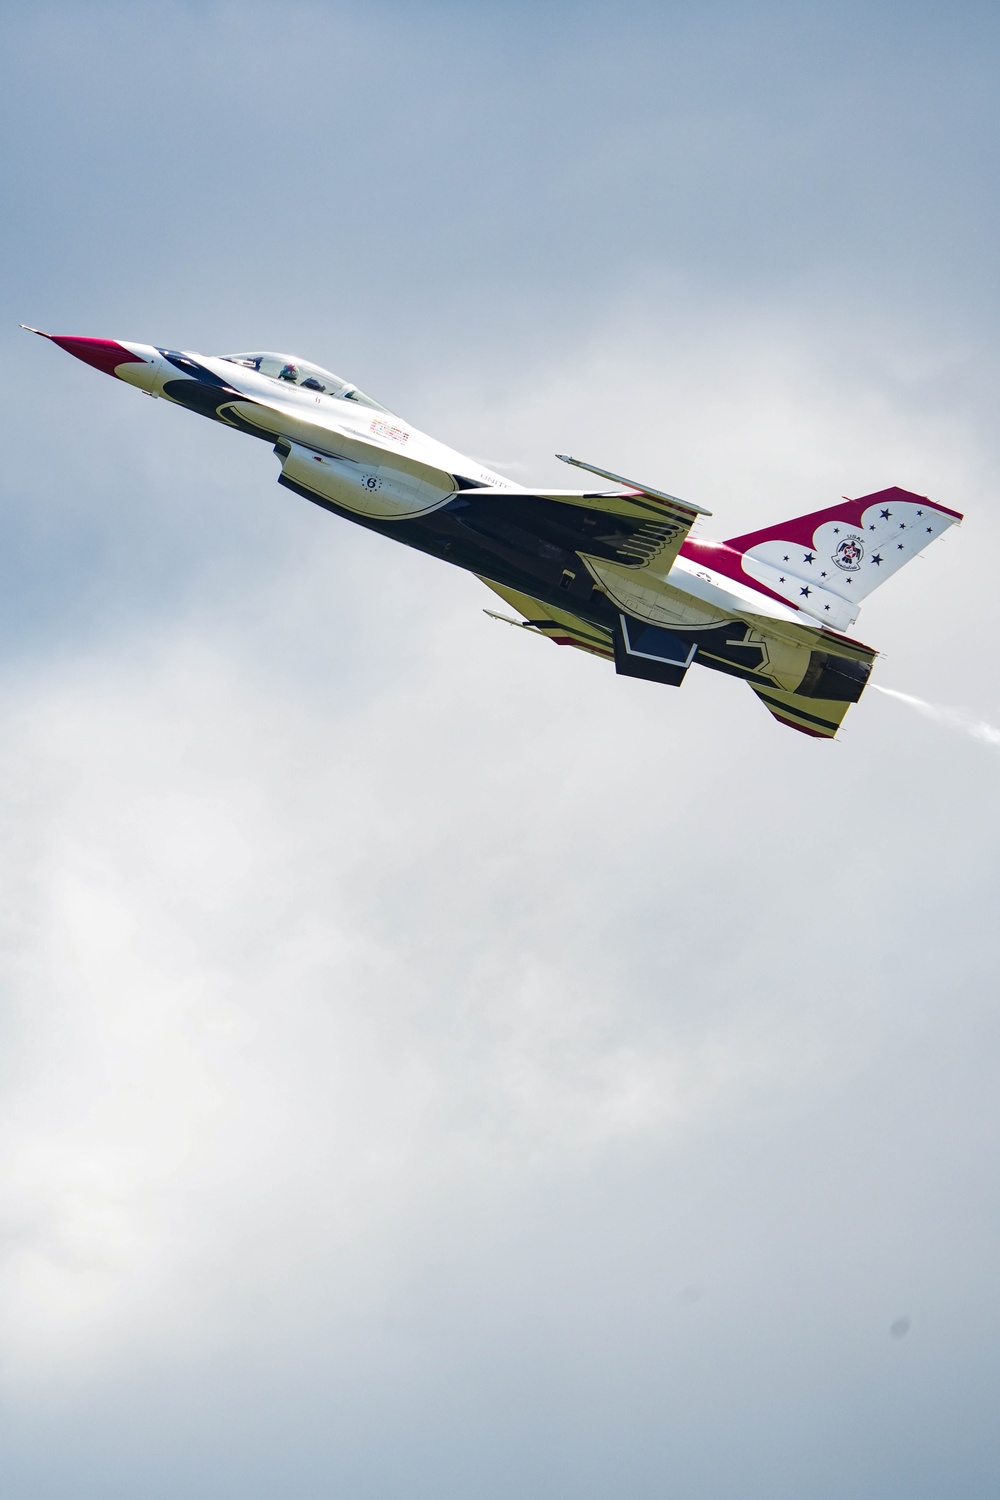 DVIDS Images Thunderbirds soar over Augusta Airshow [Image 6 of 17]